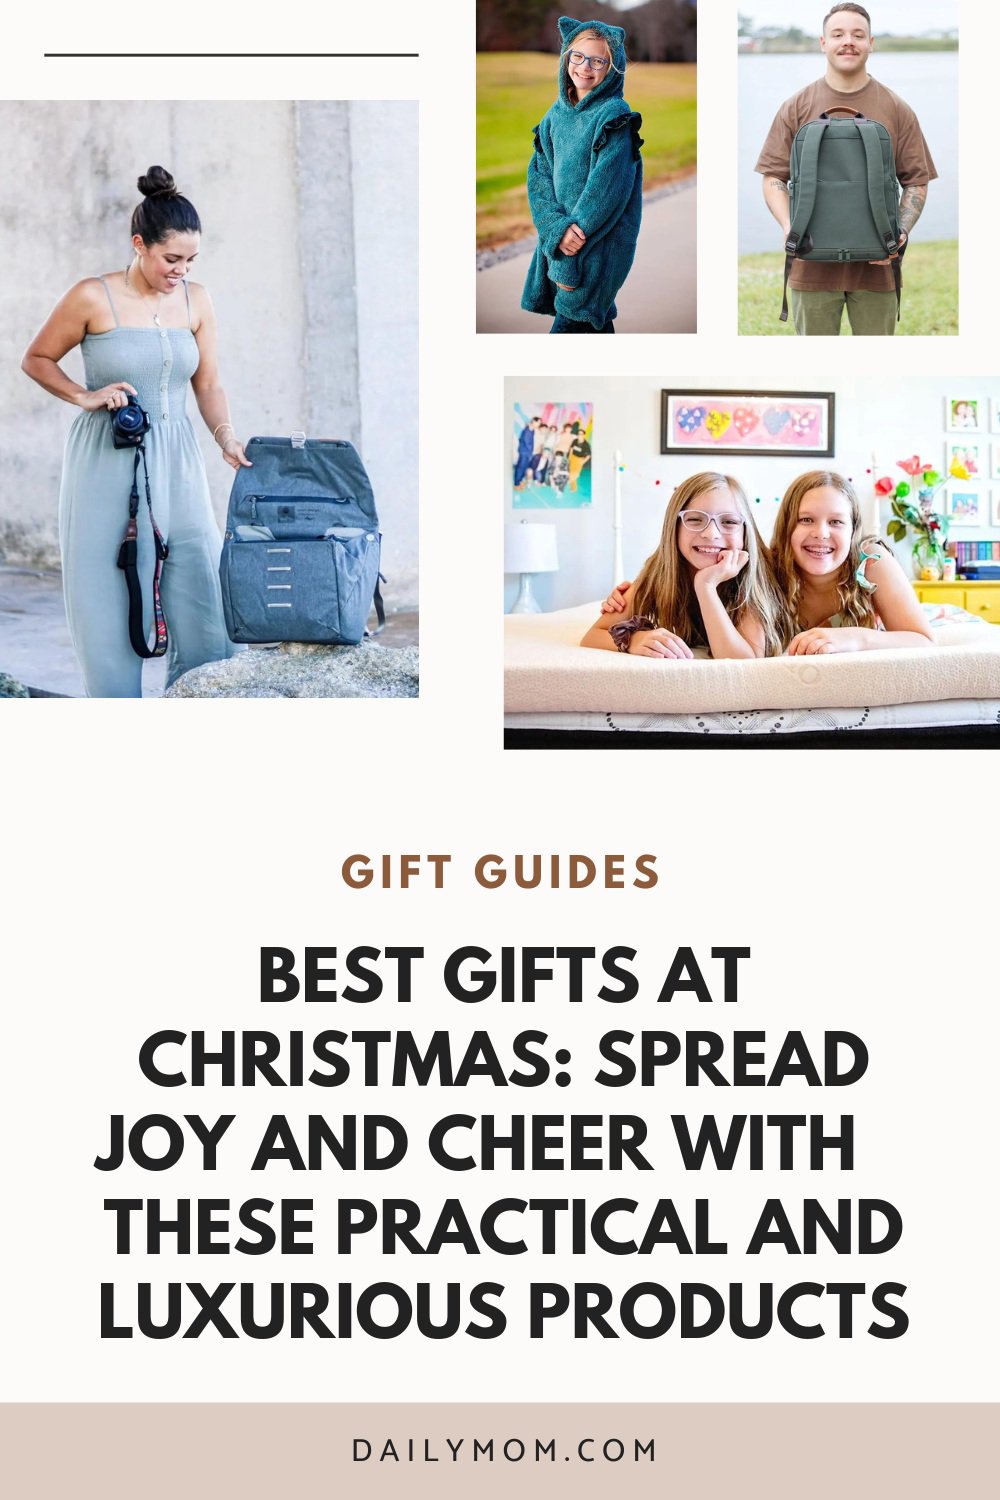 The 24 Best Gifts At Christmas: Spread Joy And Cheer With These Awesome Products 192 Daily Mom, Magazine For Families